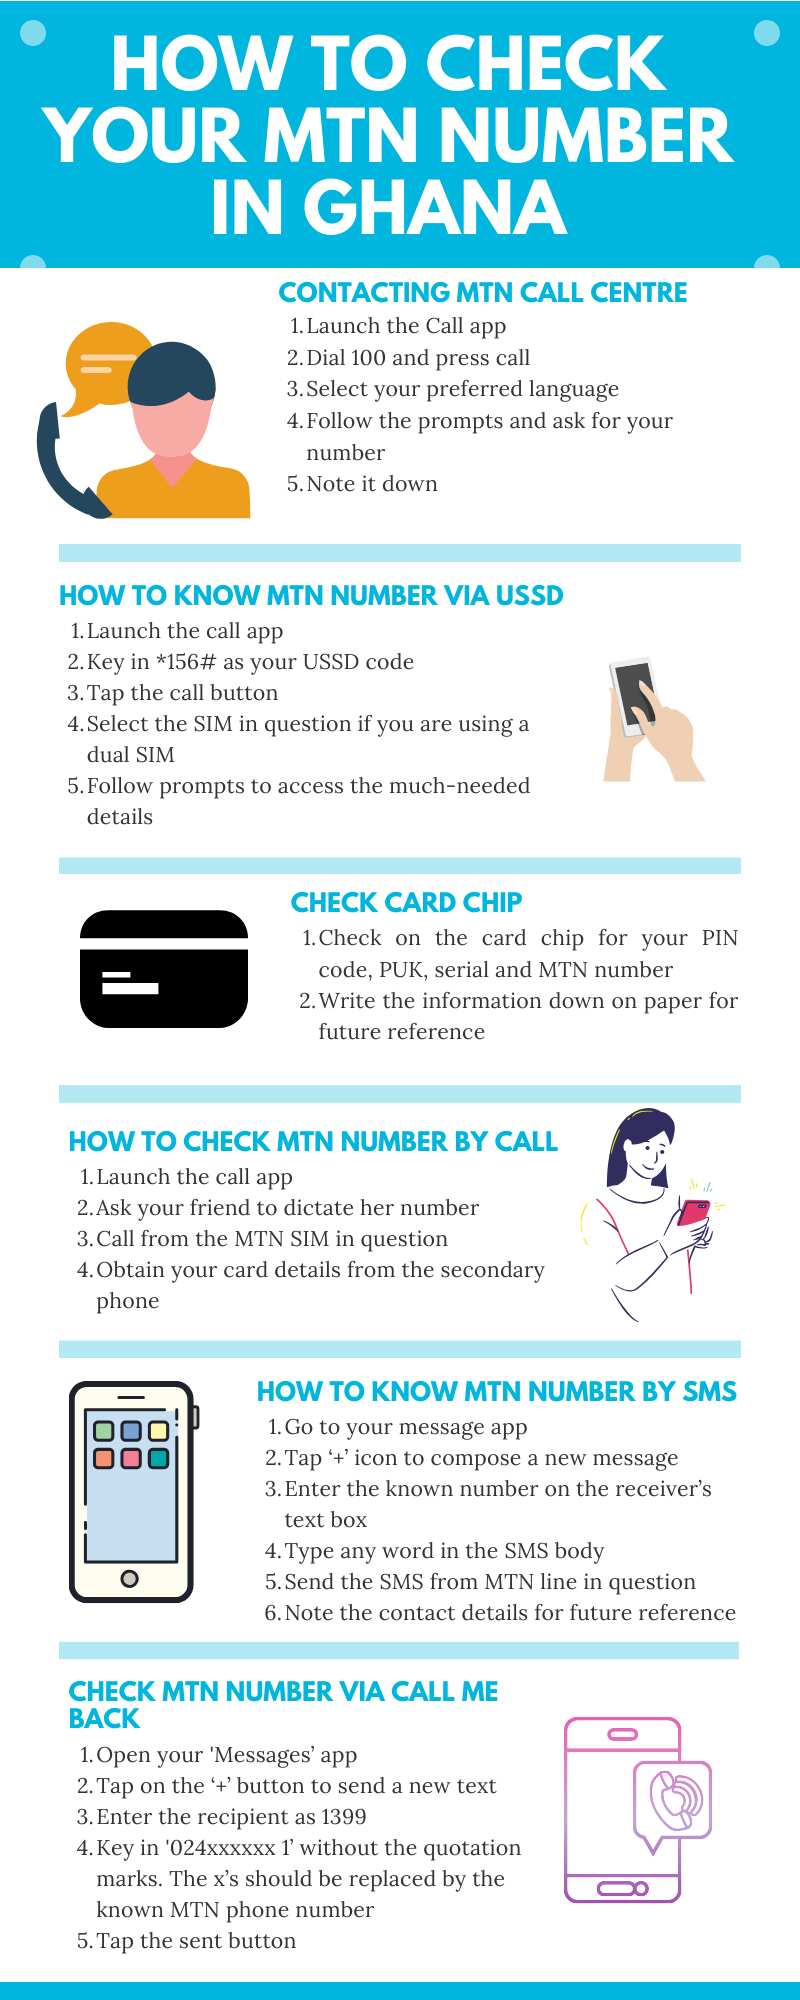 How to check your MTN number